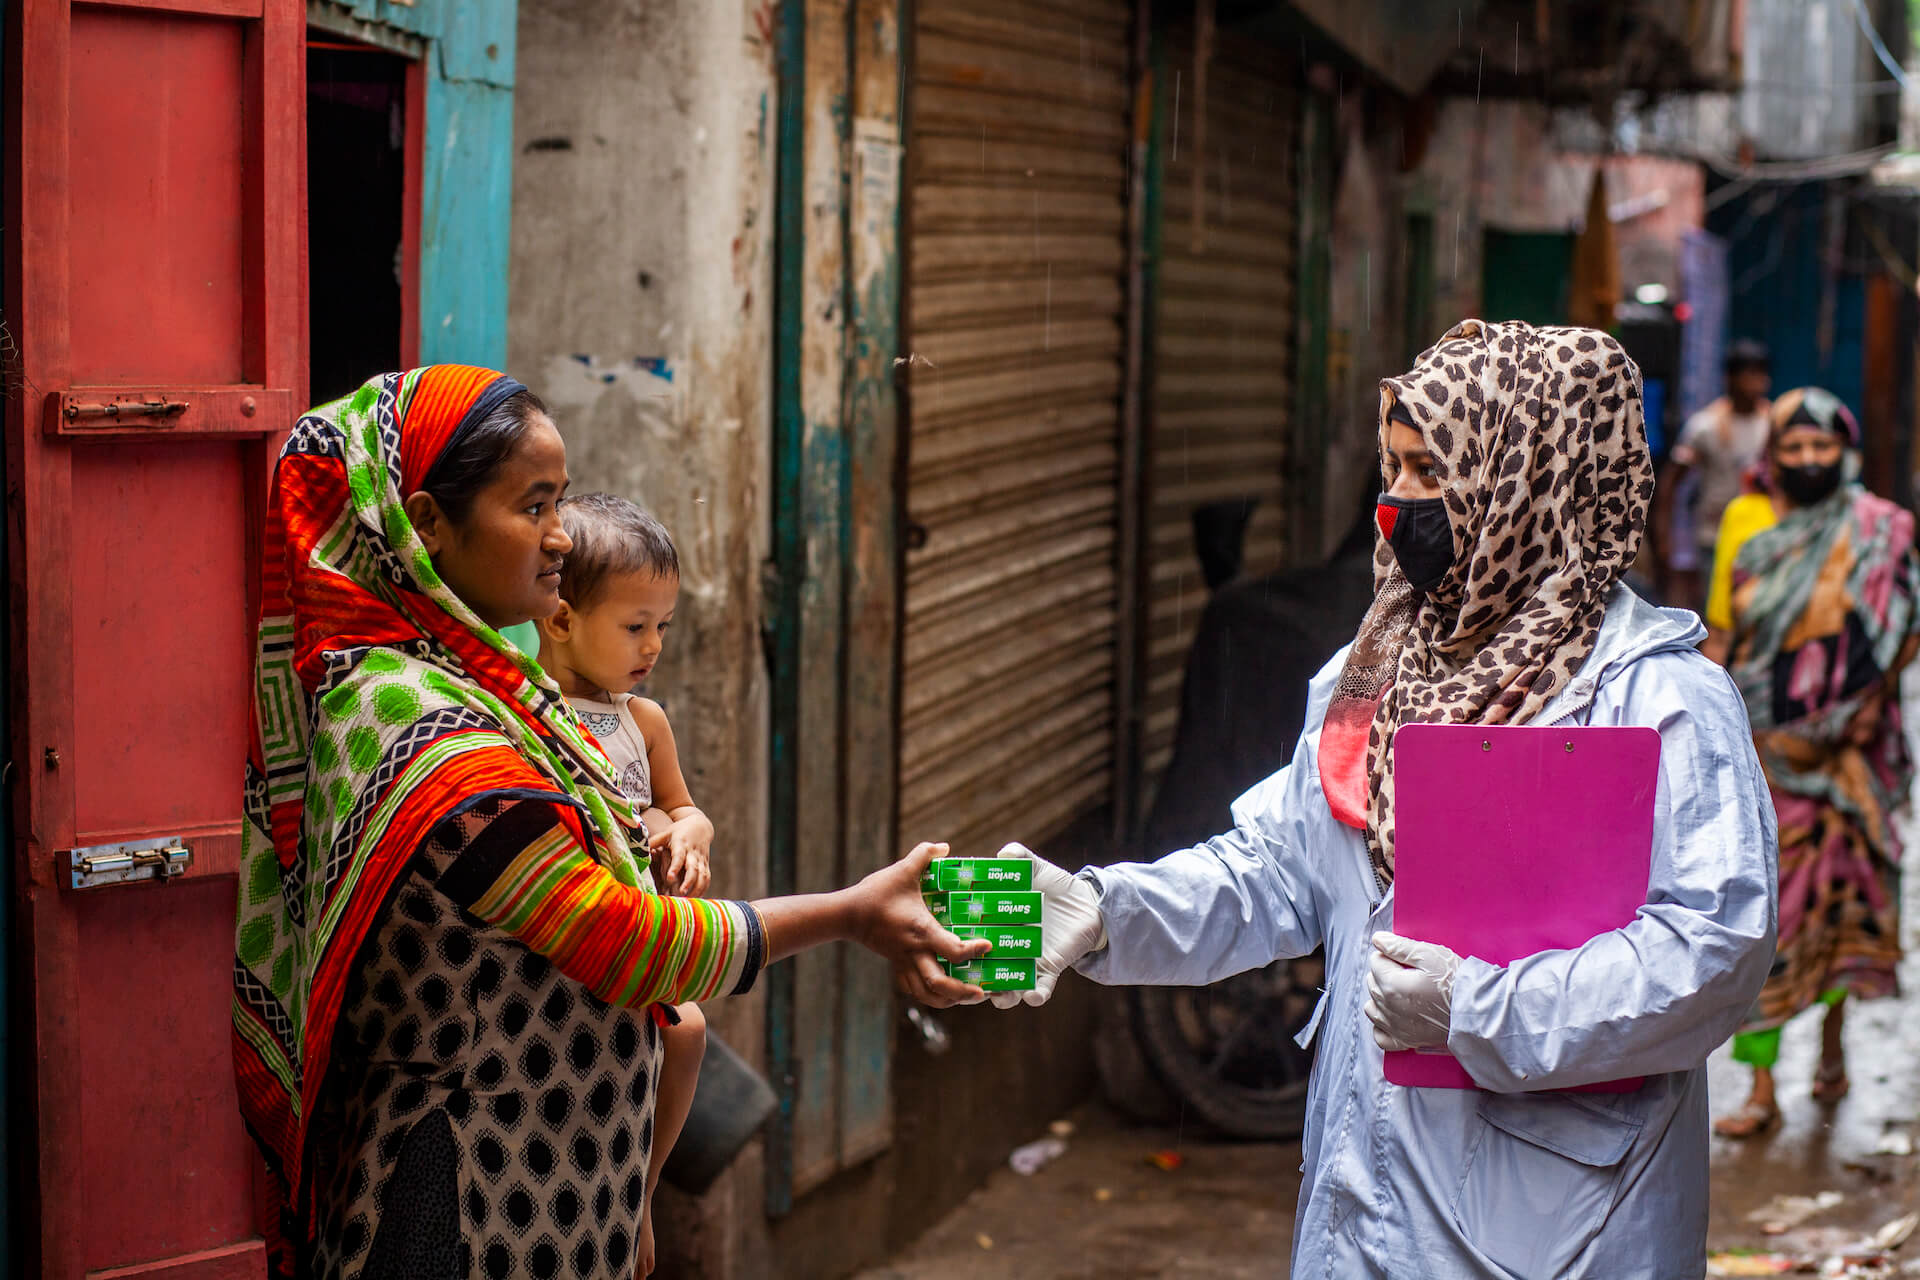 Tanzima Akter works as a community facilitator under the LIUPC project of UNDP Bangladesh. Here she is distributing anti-bacterial and disinfecting soap to a family in Dhaka. Photo: UN Women/Fahad Abdullah Kaizer